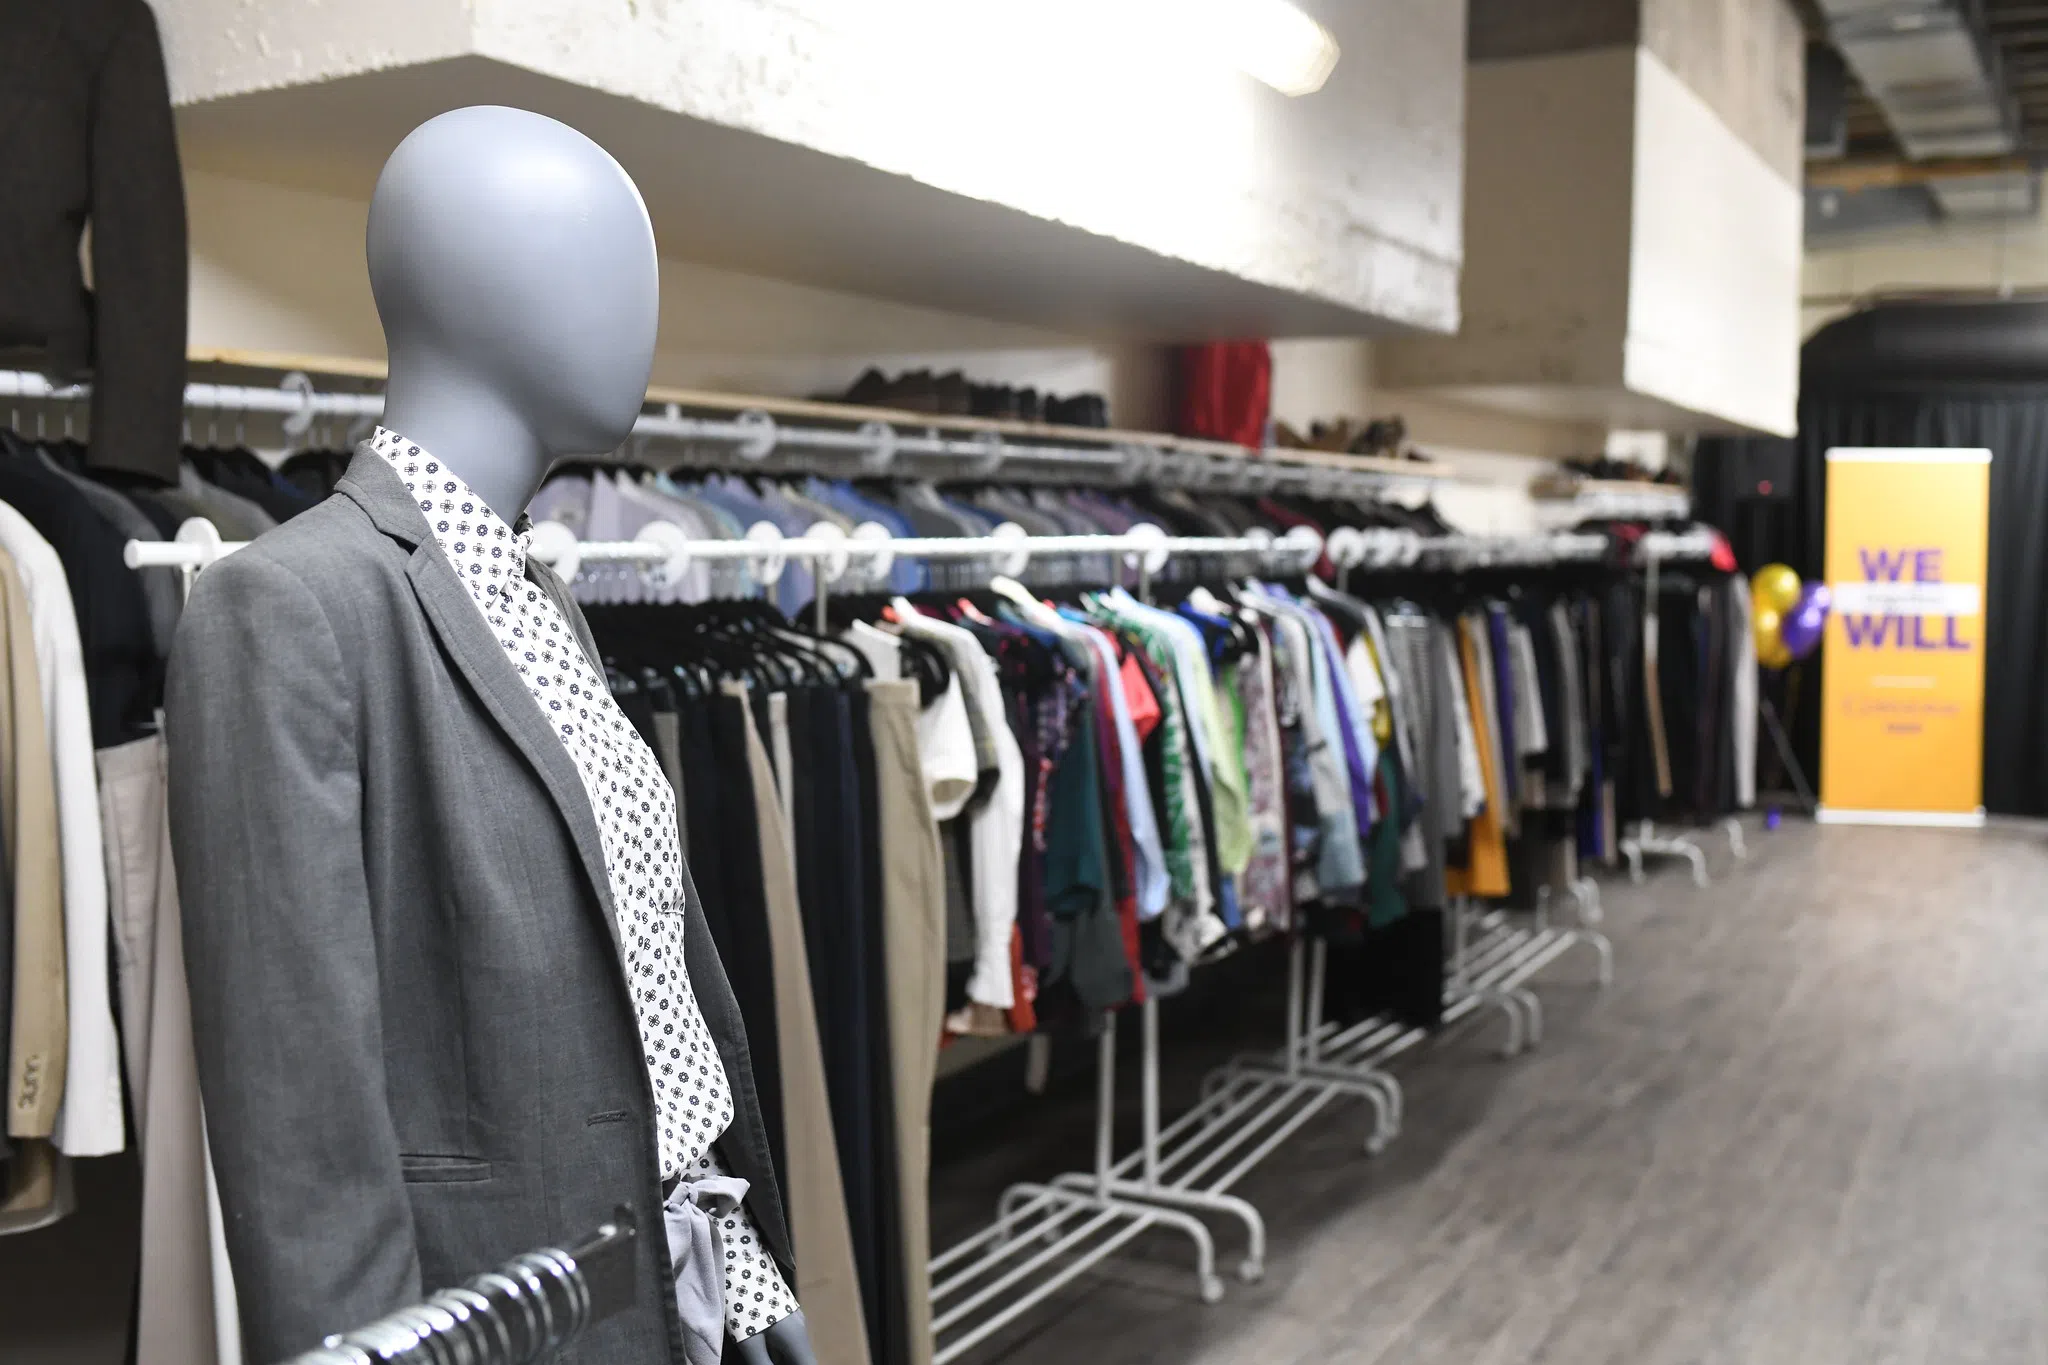 Clothing racks with hanging items against the wall. Mannequin dressed in business casual outfit displayed out front. 